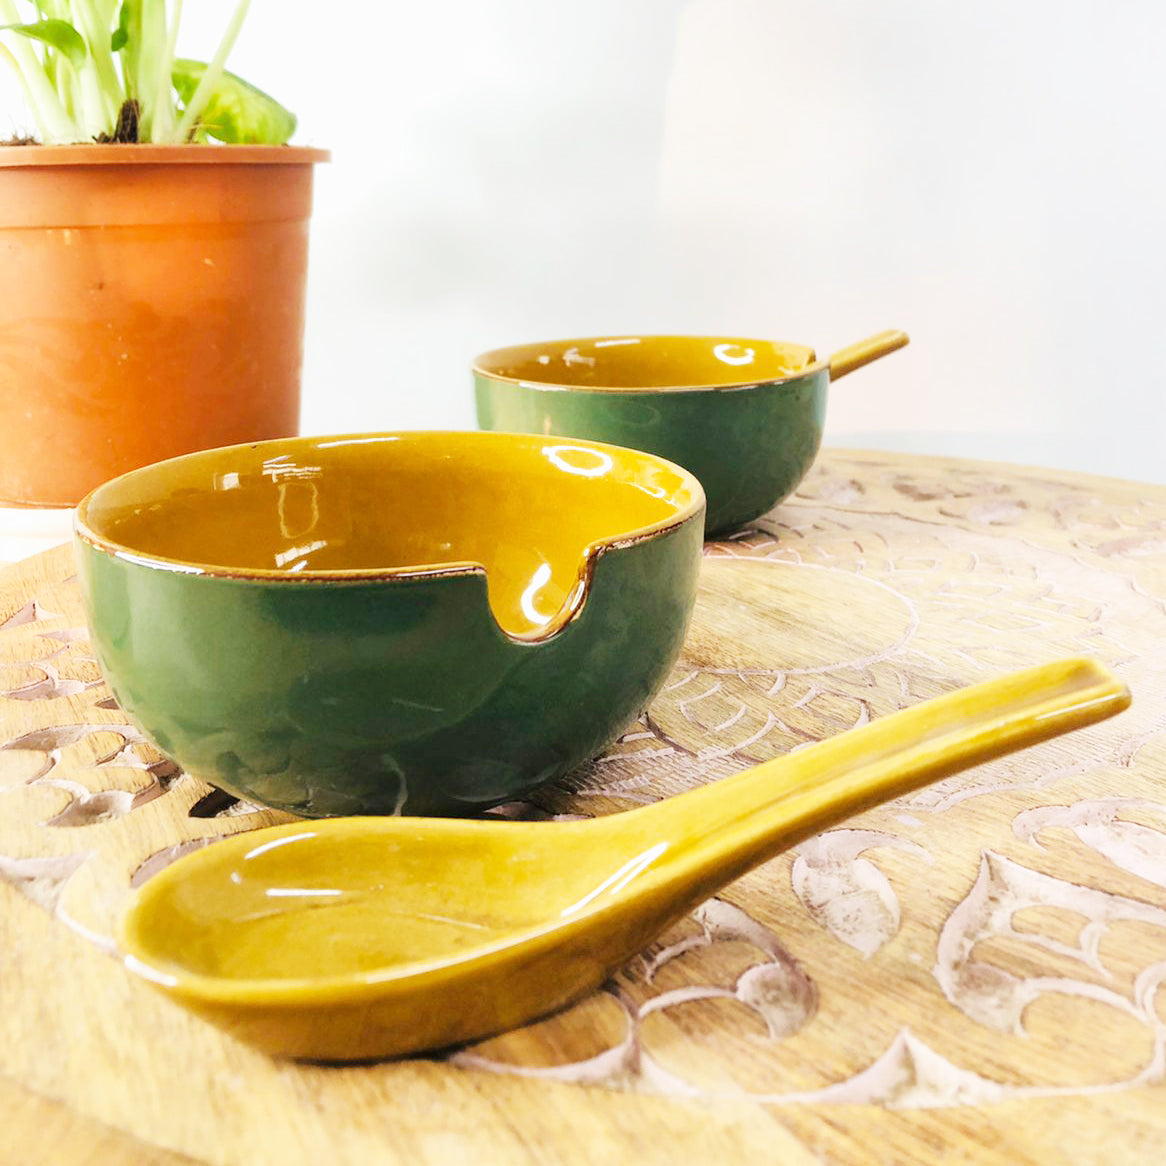 Handmade Ceramic Soup Bowl with Spoon (Set of 4)